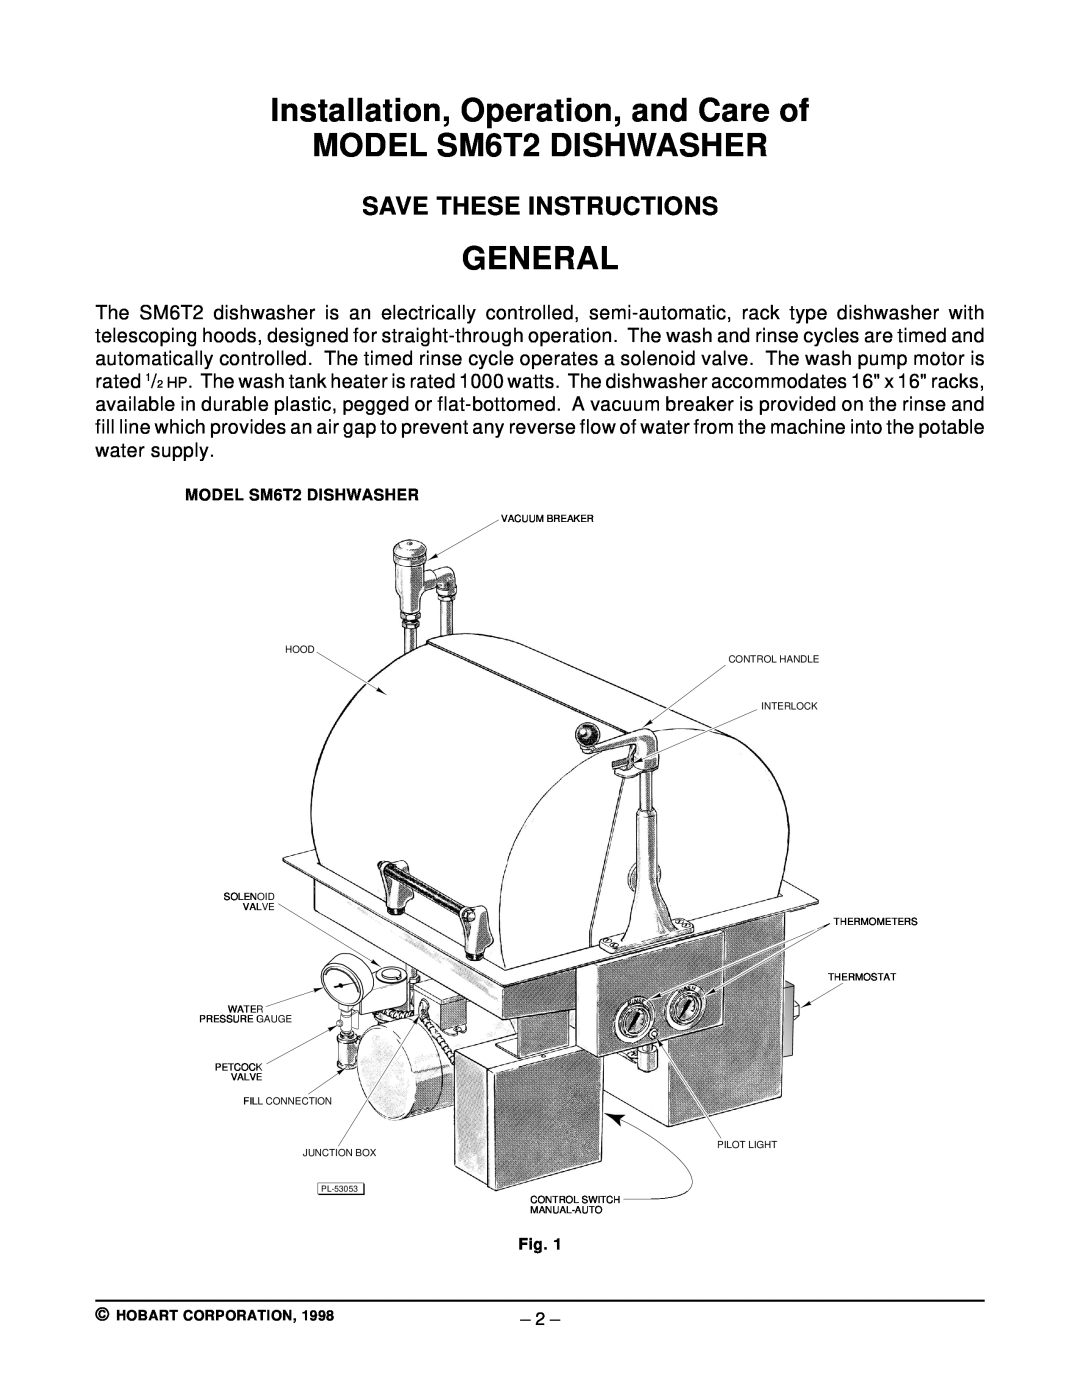 Hobart SM6T2 ML-110857 Installation, Operation, and Care of, MODEL SM6T2 DISHWASHER, General, Save These Instructions 